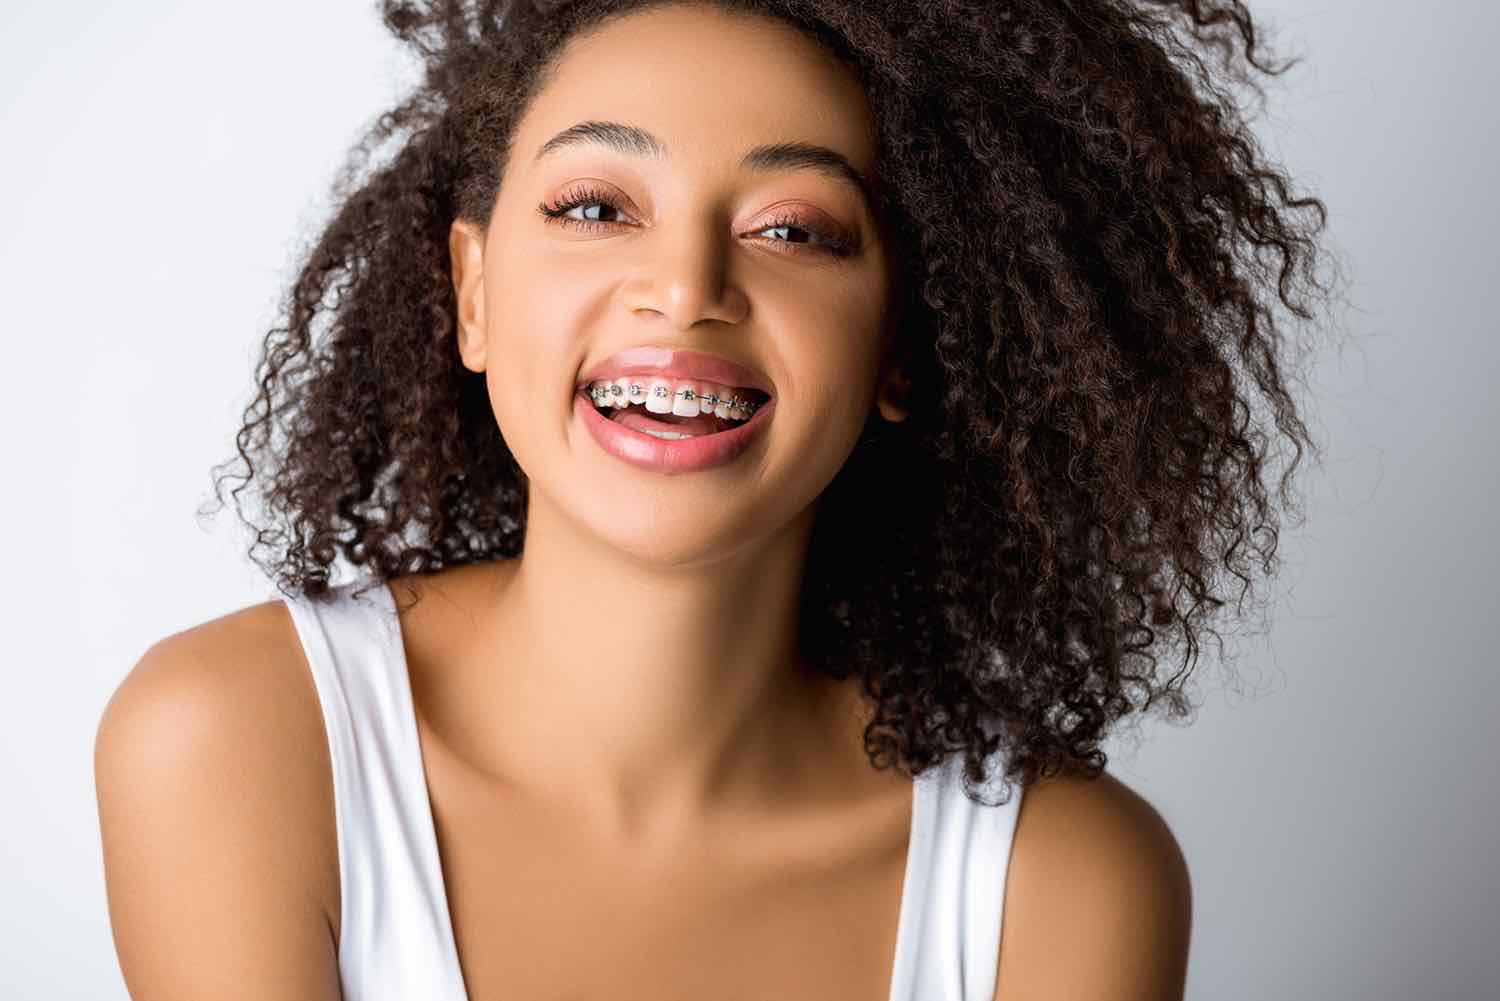 Teenager with braces | Bronzeville Braces | King Dental in Chicago